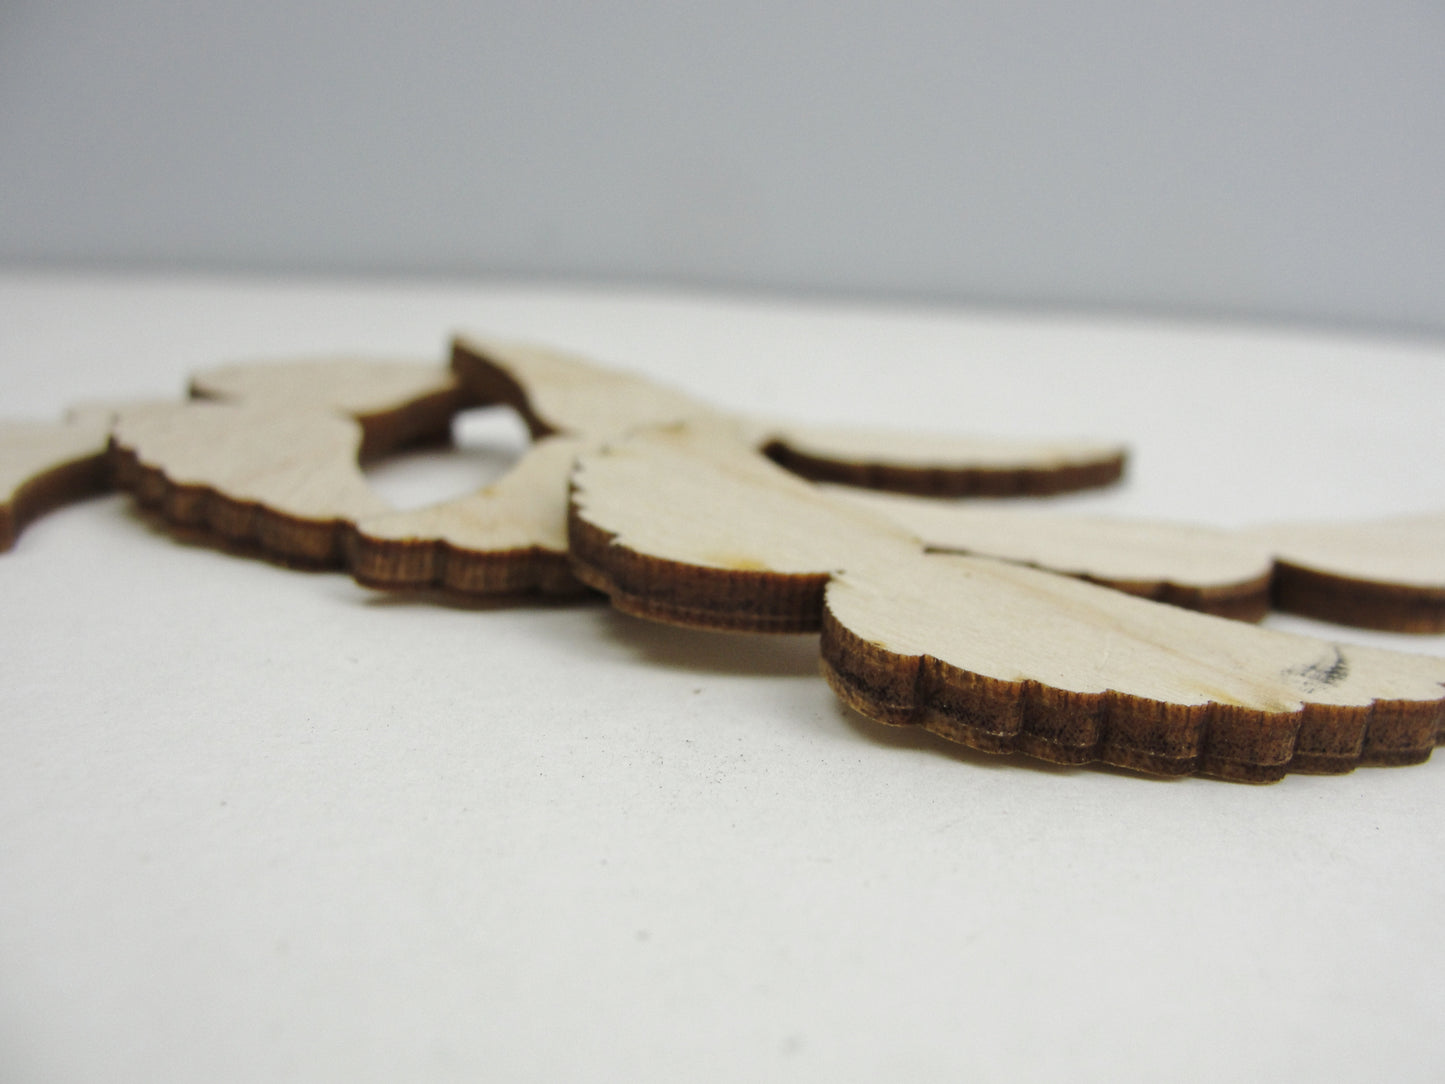 Small wooden angel wings set of 6